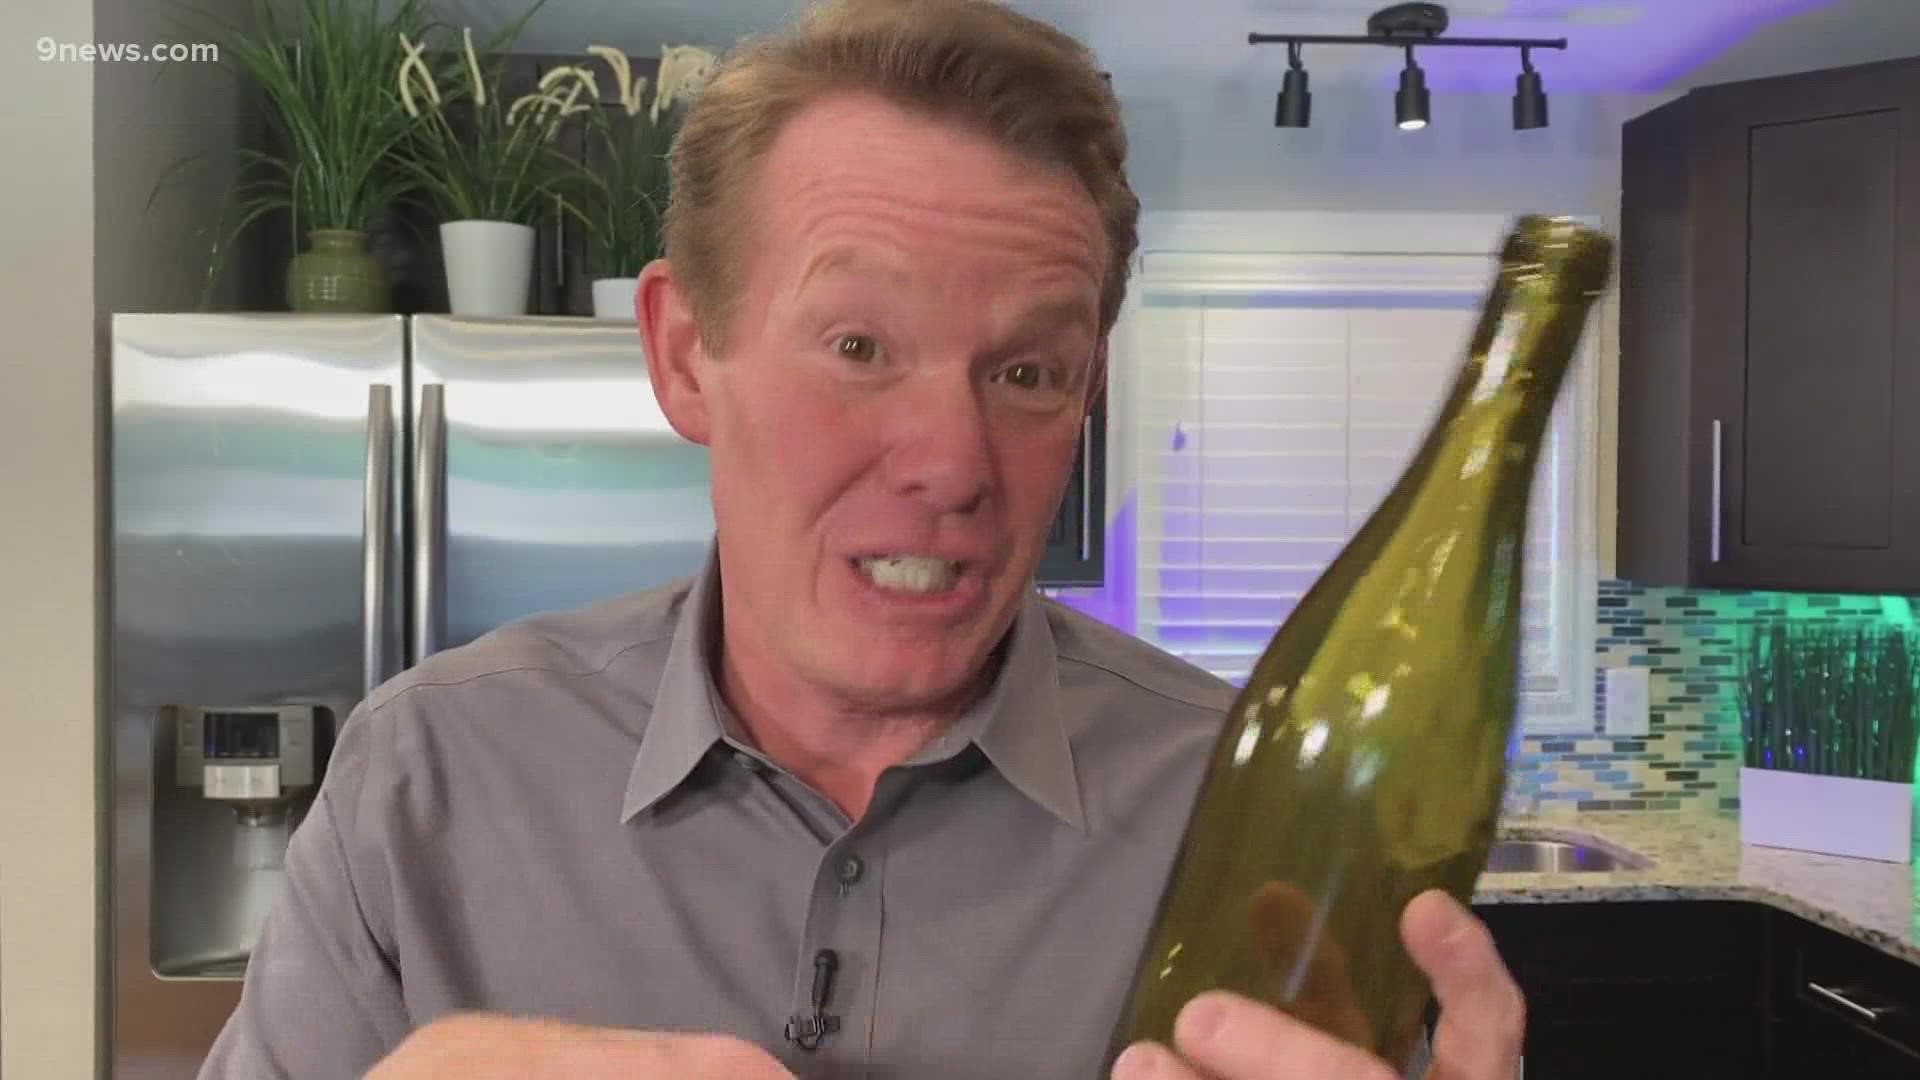 Steve Spangler shares a parlor trick that dates back hundreds of years.